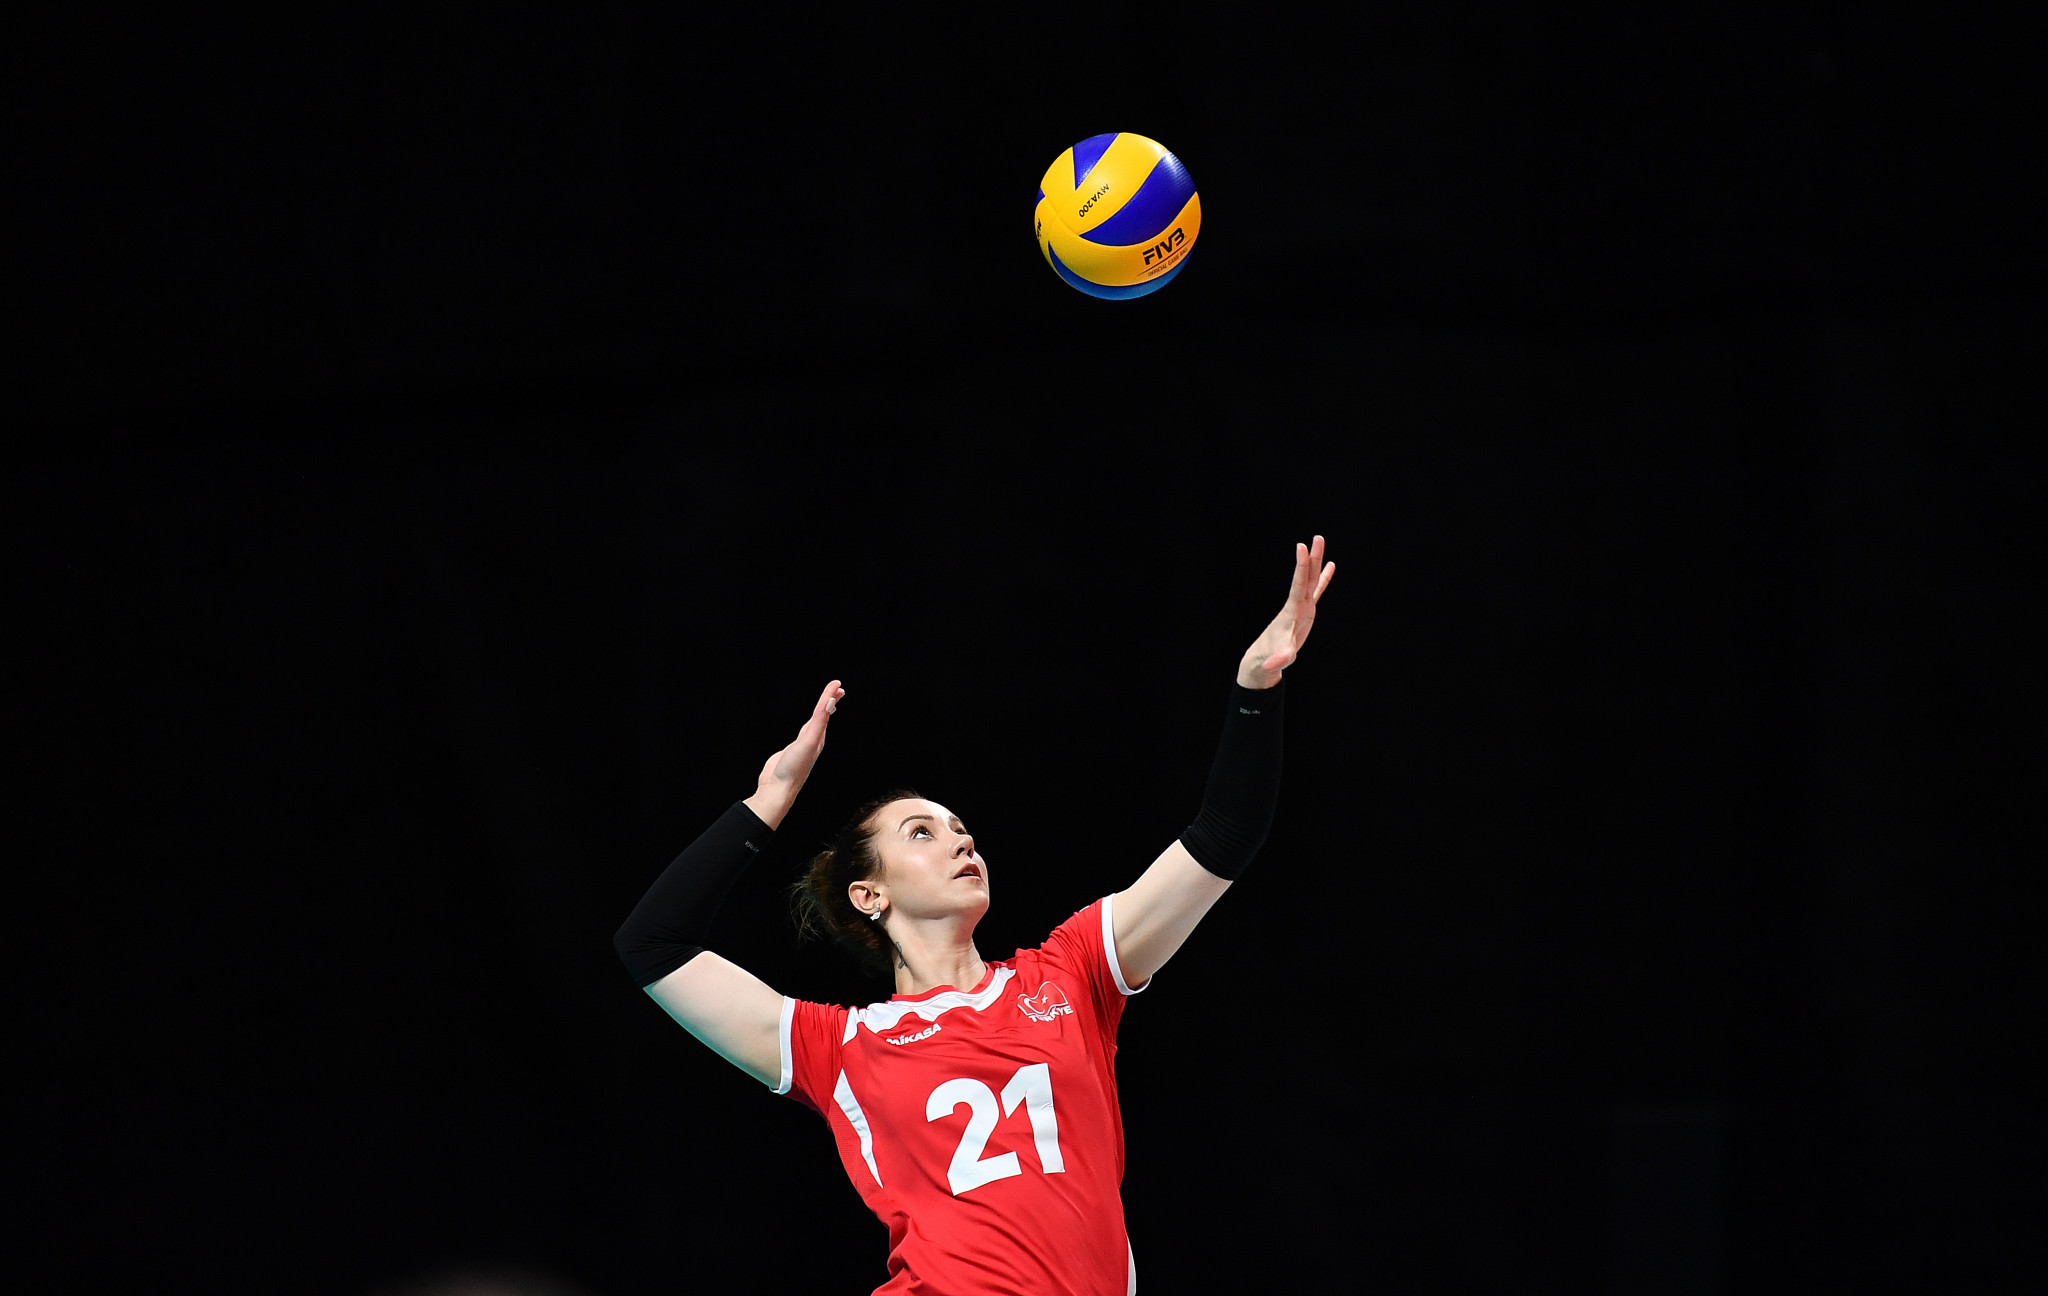 Turkey were impressive in dismantling reigning champions United States at the FIVB Volleyball Women's Nations League ©Getty Images